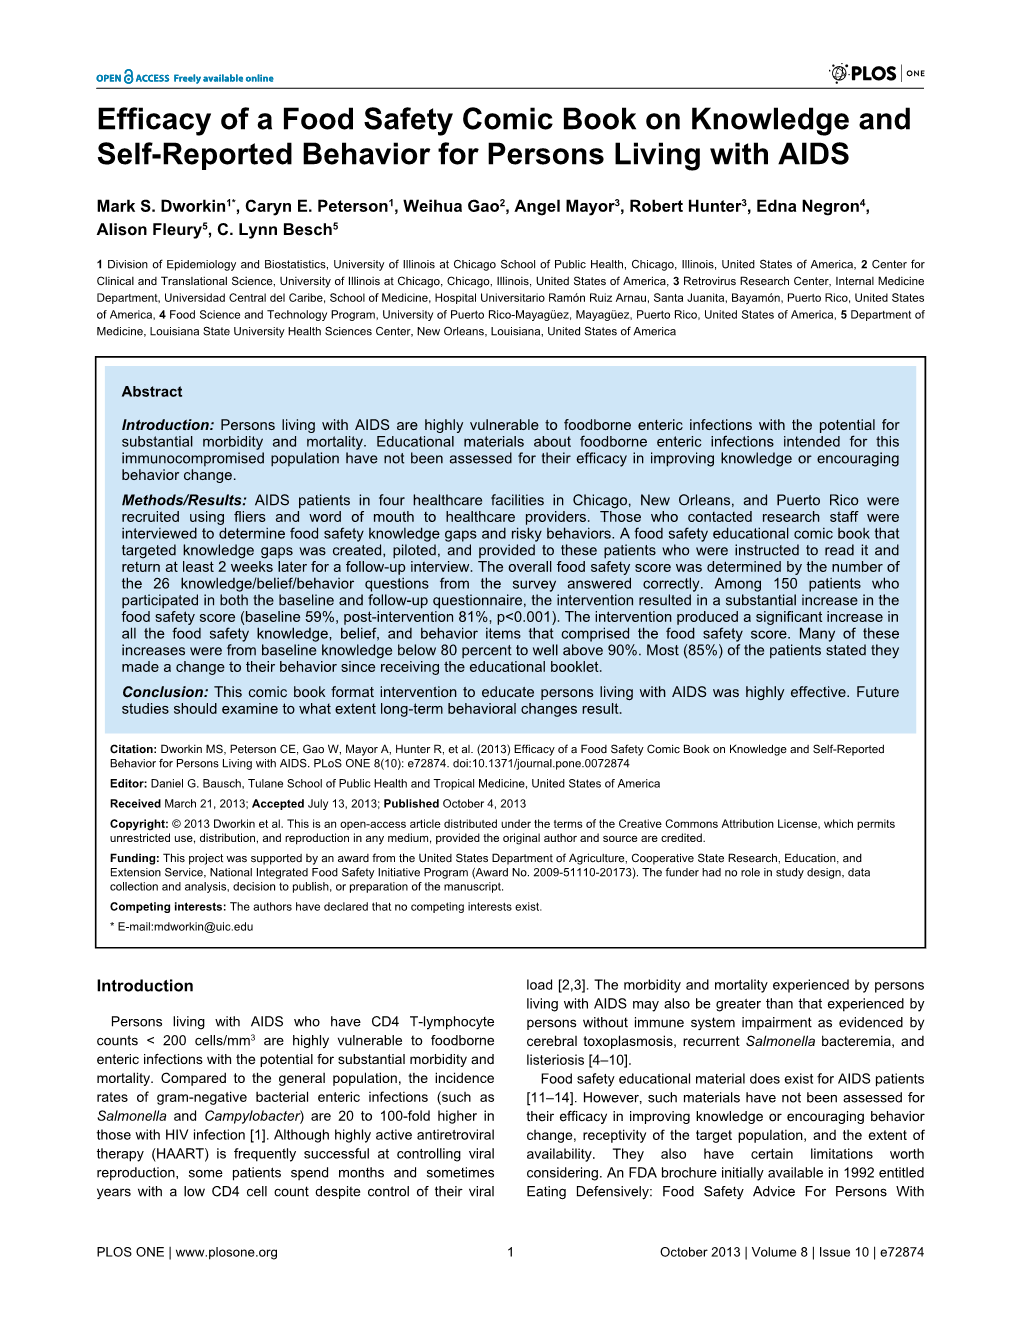 Efficacy of a Food Safety Comic Book on Knowledge and Self-Reported Behavior for Persons Living with AIDS